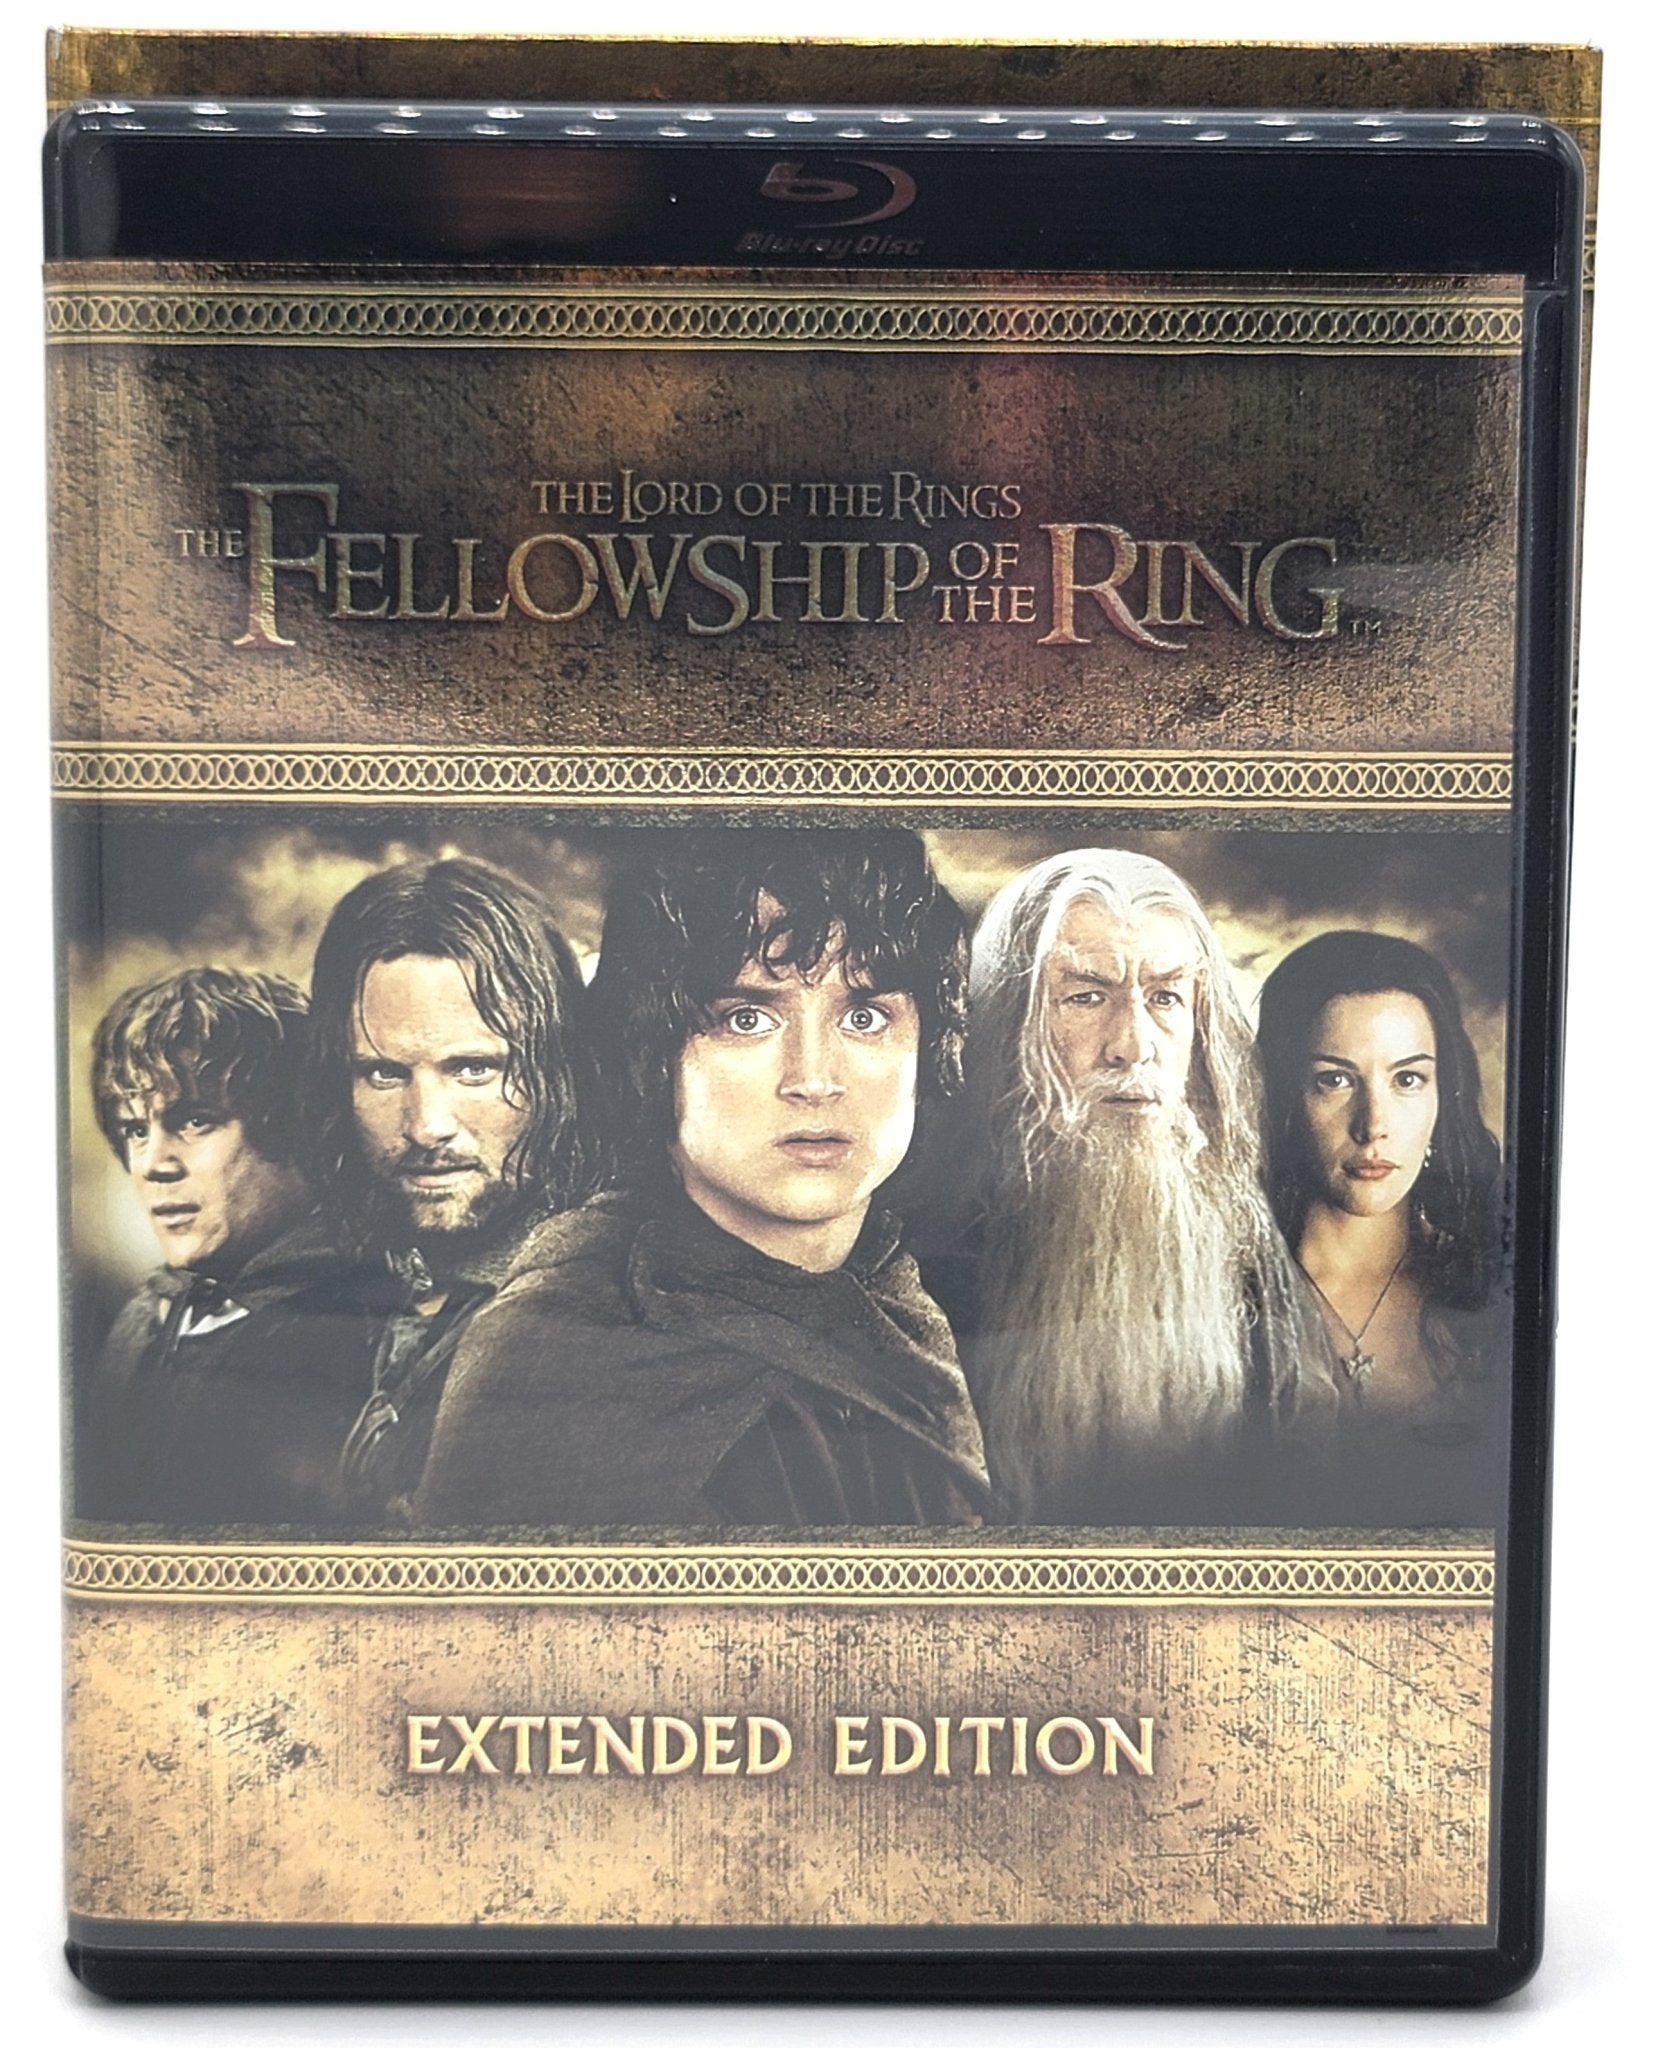 New Line Home Entertainment - The Lord of the Rings - The Motion Picture Trilogy - Extended Edition | 15 Disc Set - Blu Ray & DVD - DVD & Blu-ray - Steady Bunny Shop